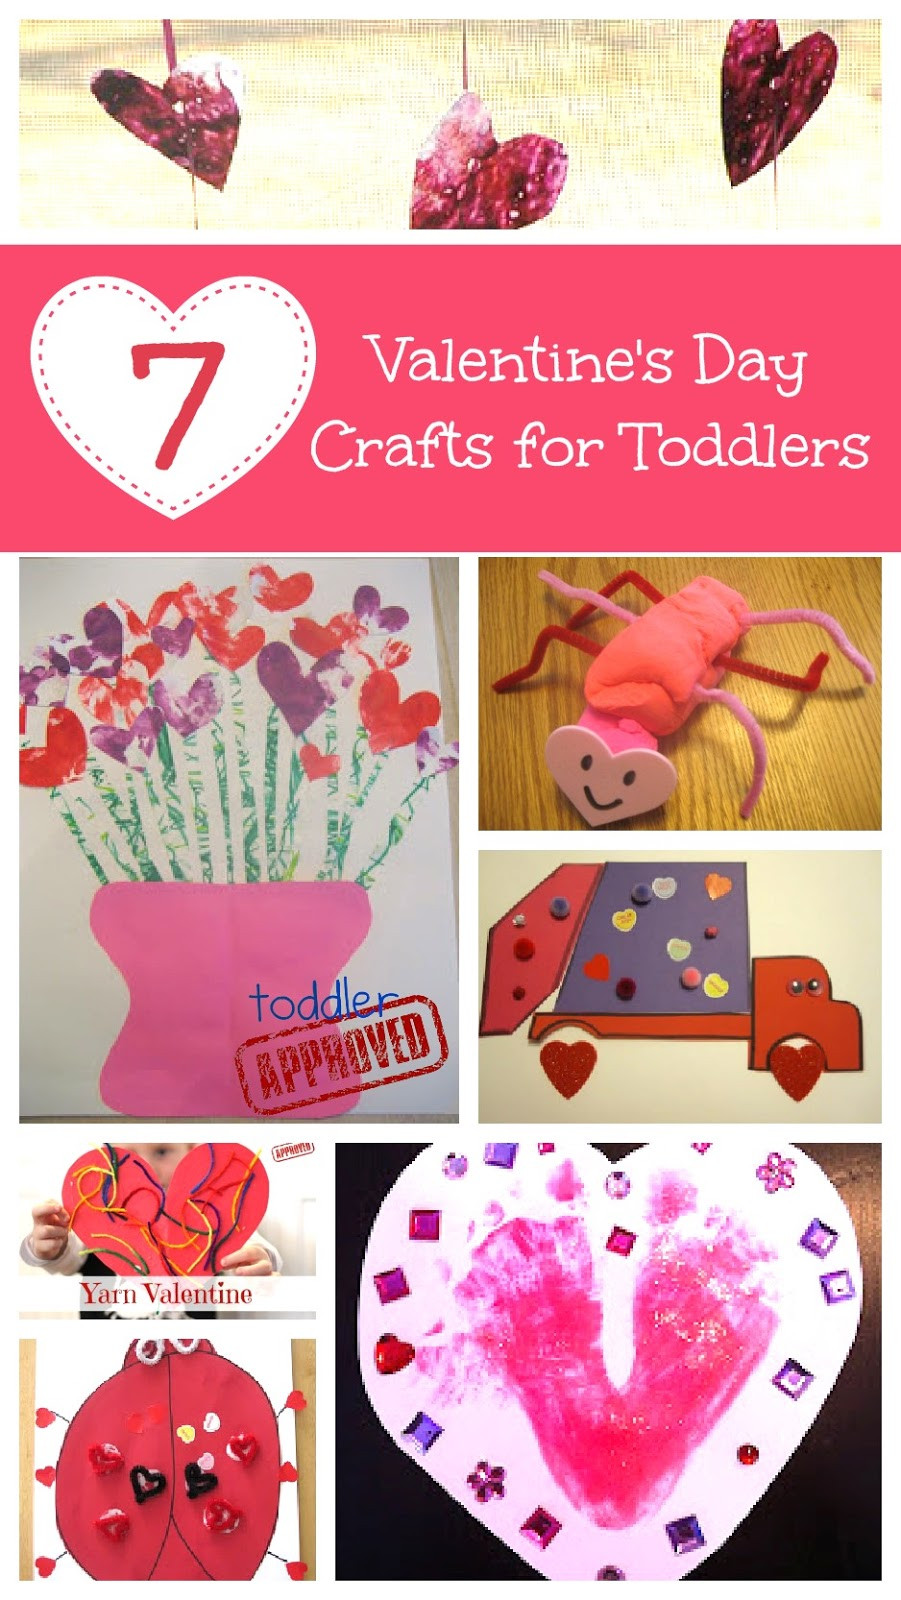 Valentine Crafts Ideas For Toddlers
 Toddler Approved 7 Valentine s Day Crafts for Toddlers